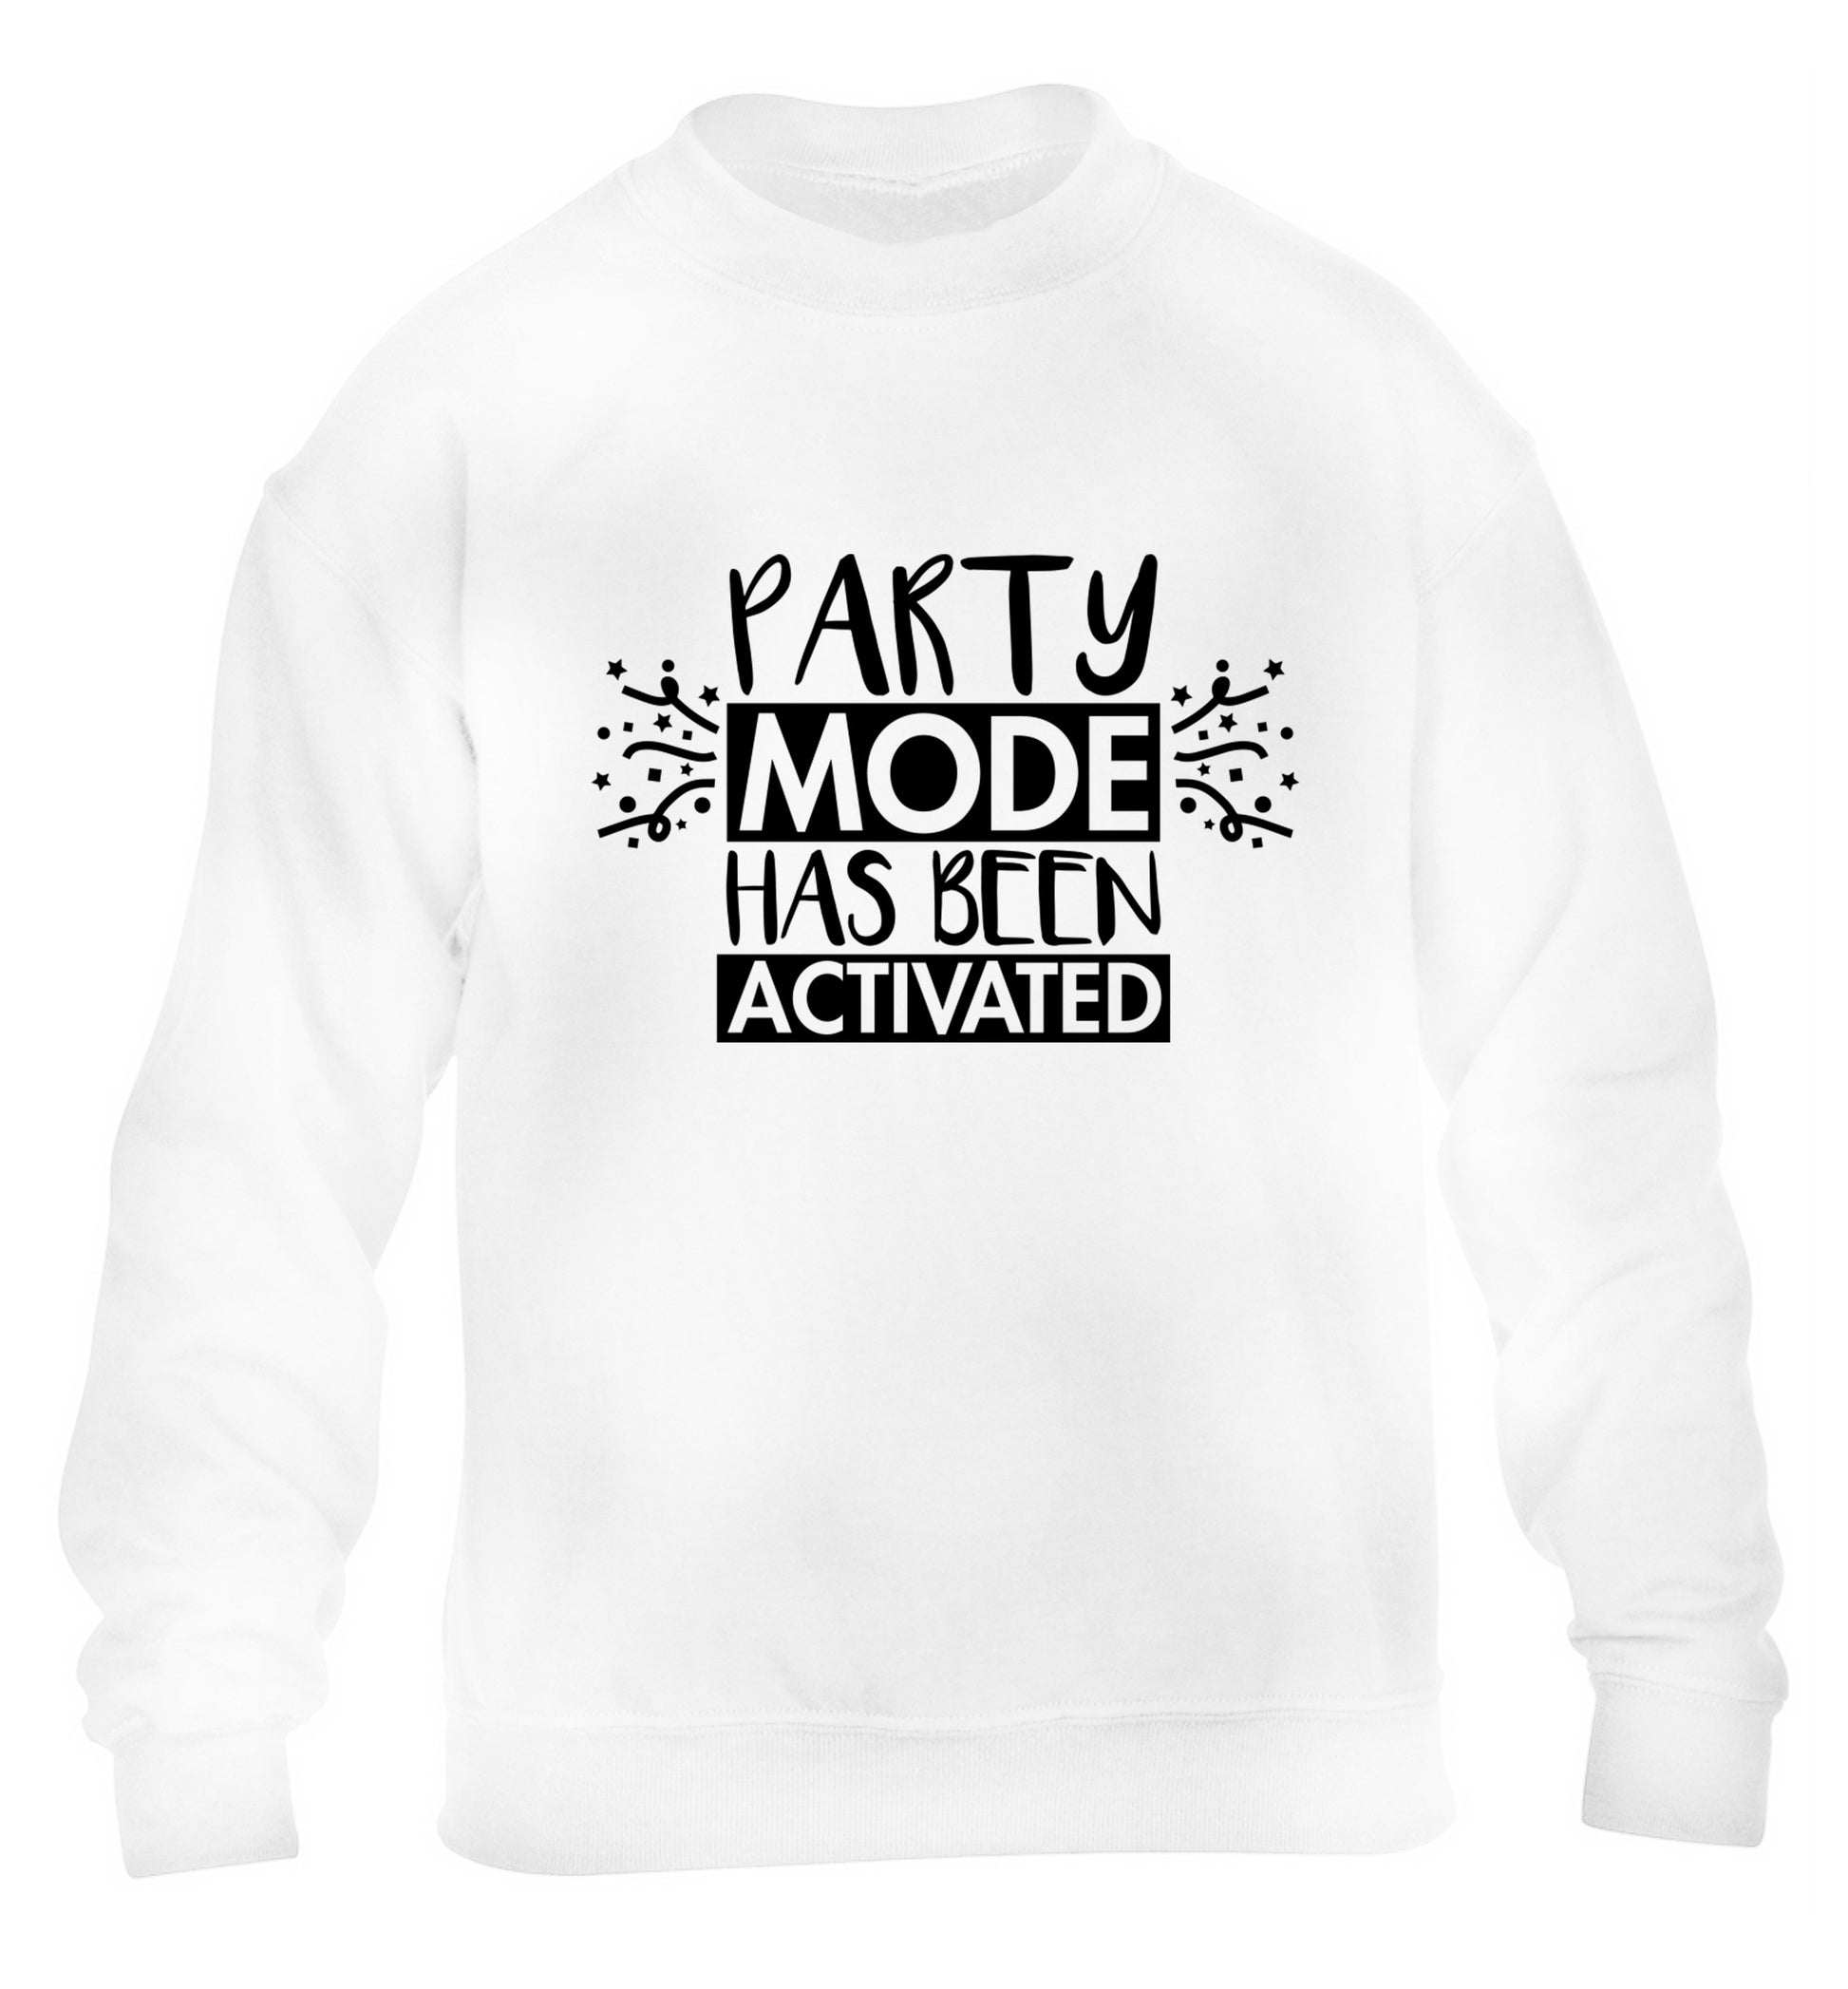 Please do not disturb party mode has been activated children's white sweater 12-14 Years